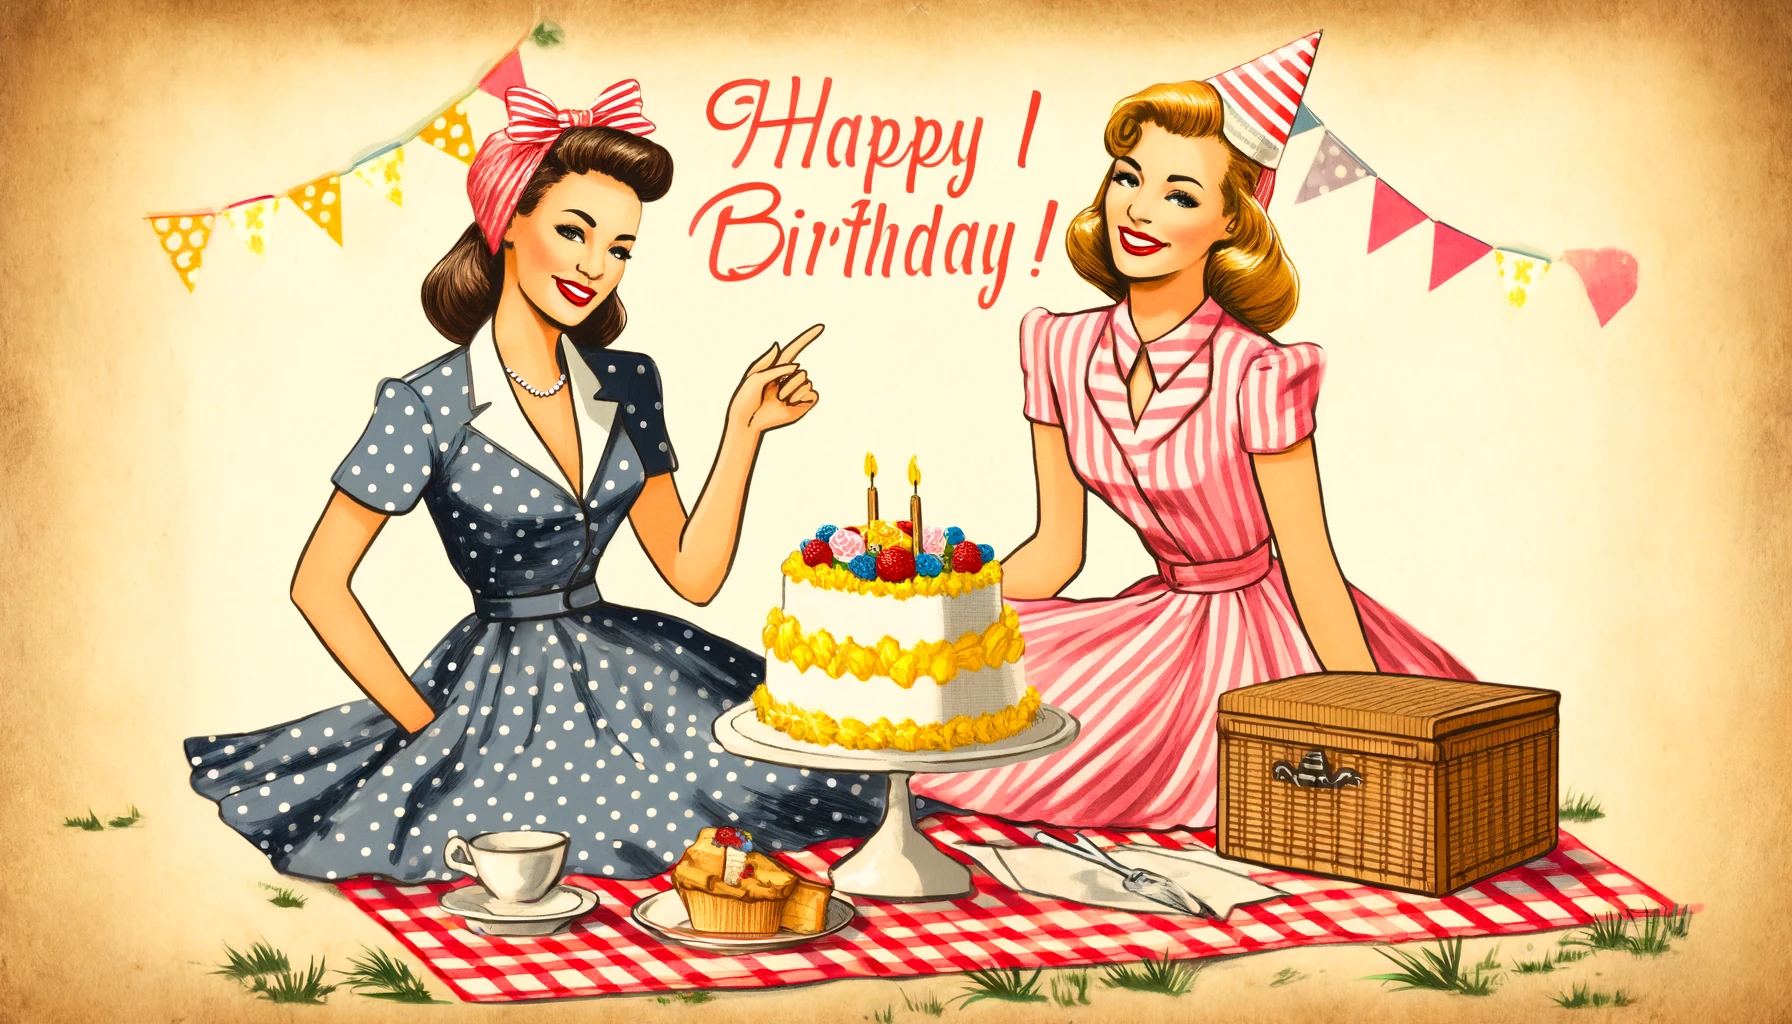 Belated Birthday Wishes for a Woman from Another Woman